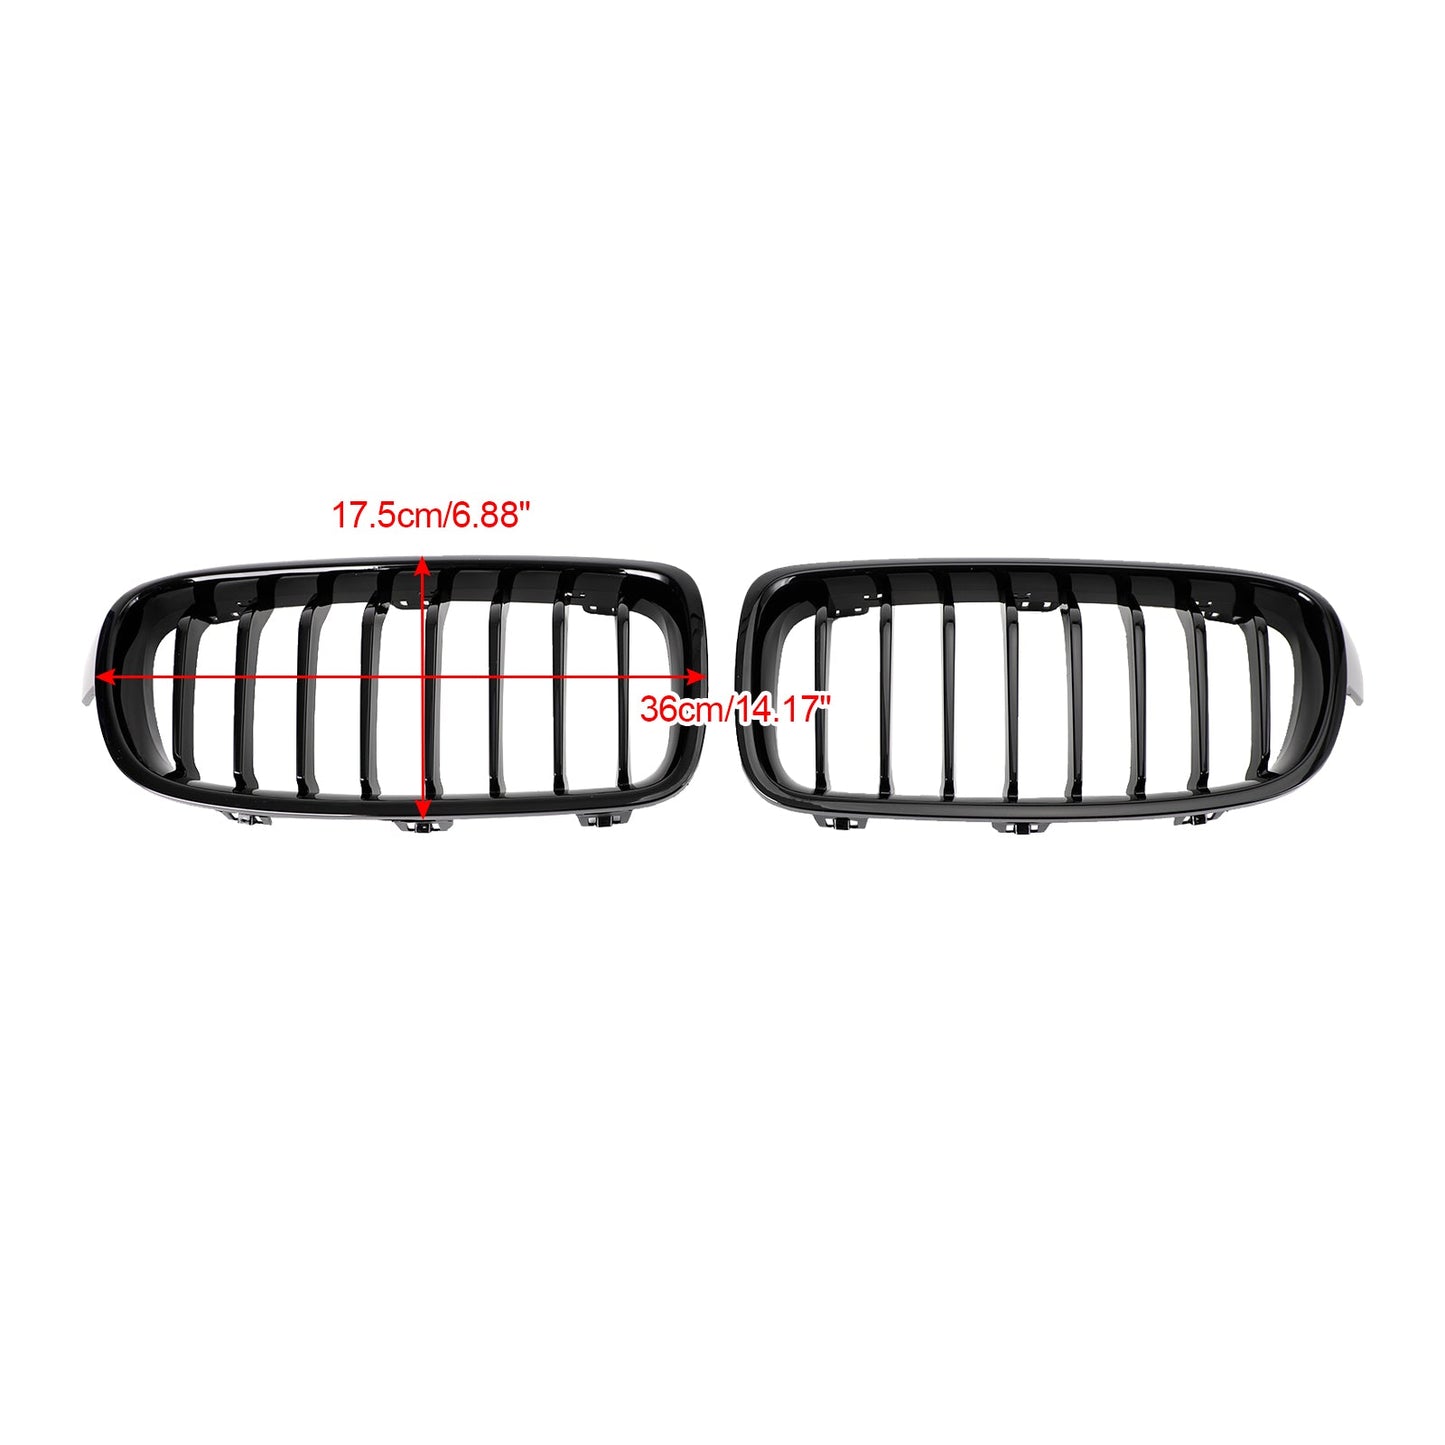 BMW 3 Series F30 F31 F35 2012-2019 Gloss Black Front Kidney Grill Grille